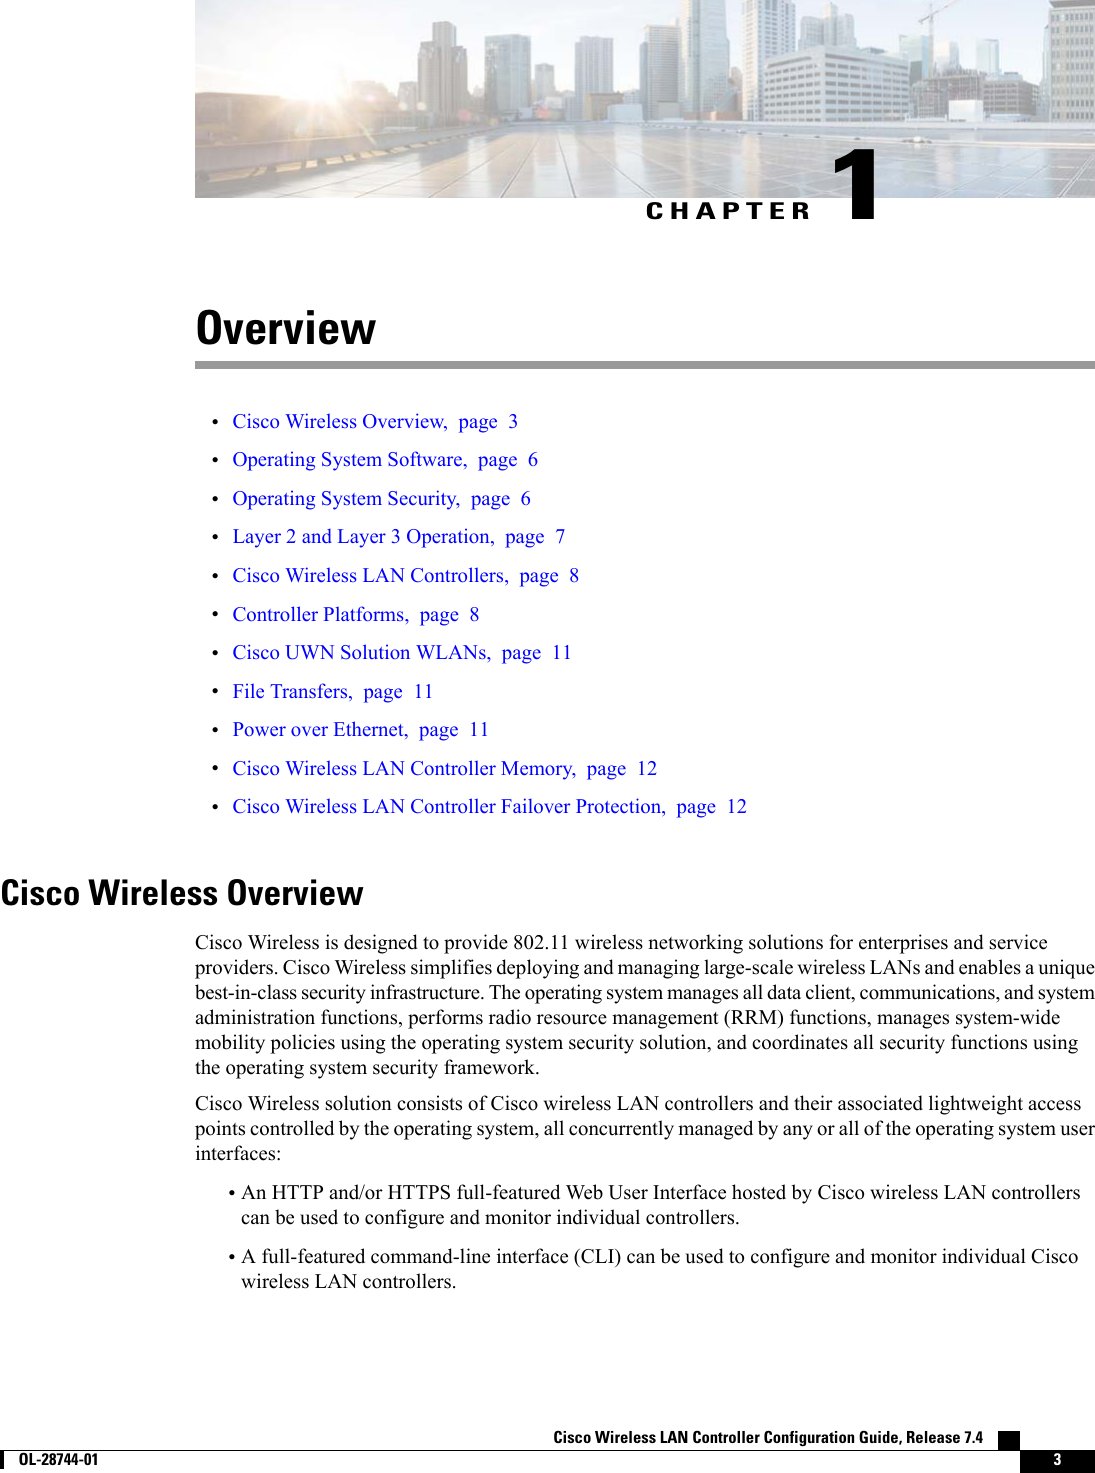 CHAPTER 1Overview•Cisco Wireless Overview, page 3•Operating System Software, page 6•Operating System Security, page 6•Layer 2 and Layer 3 Operation, page 7•Cisco Wireless LAN Controllers, page 8•Controller Platforms, page 8•Cisco UWN Solution WLANs, page 11•File Transfers, page 11•Power over Ethernet, page 11•Cisco Wireless LAN Controller Memory, page 12•Cisco Wireless LAN Controller Failover Protection, page 12Cisco Wireless OverviewCisco Wireless is designed to provide 802.11 wireless networking solutions for enterprises and serviceproviders. Cisco Wireless simplifies deploying and managing large-scale wireless LANs and enables a uniquebest-in-class security infrastructure. The operating system manages all data client, communications, and systemadministration functions, performs radio resource management (RRM) functions, manages system-widemobility policies using the operating system security solution, and coordinates all security functions usingthe operating system security framework.Cisco Wireless solution consists of Cisco wireless LAN controllers and their associated lightweight accesspoints controlled by the operating system, all concurrently managed by any or all of the operating system userinterfaces:•An HTTP and/or HTTPS full-featured Web User Interface hosted by Cisco wireless LAN controllerscan be used to configure and monitor individual controllers.•A full-featured command-line interface (CLI) can be used to configure and monitor individual Ciscowireless LAN controllers.Cisco Wireless LAN Controller Configuration Guide, Release 7.4        OL-28744-01 3